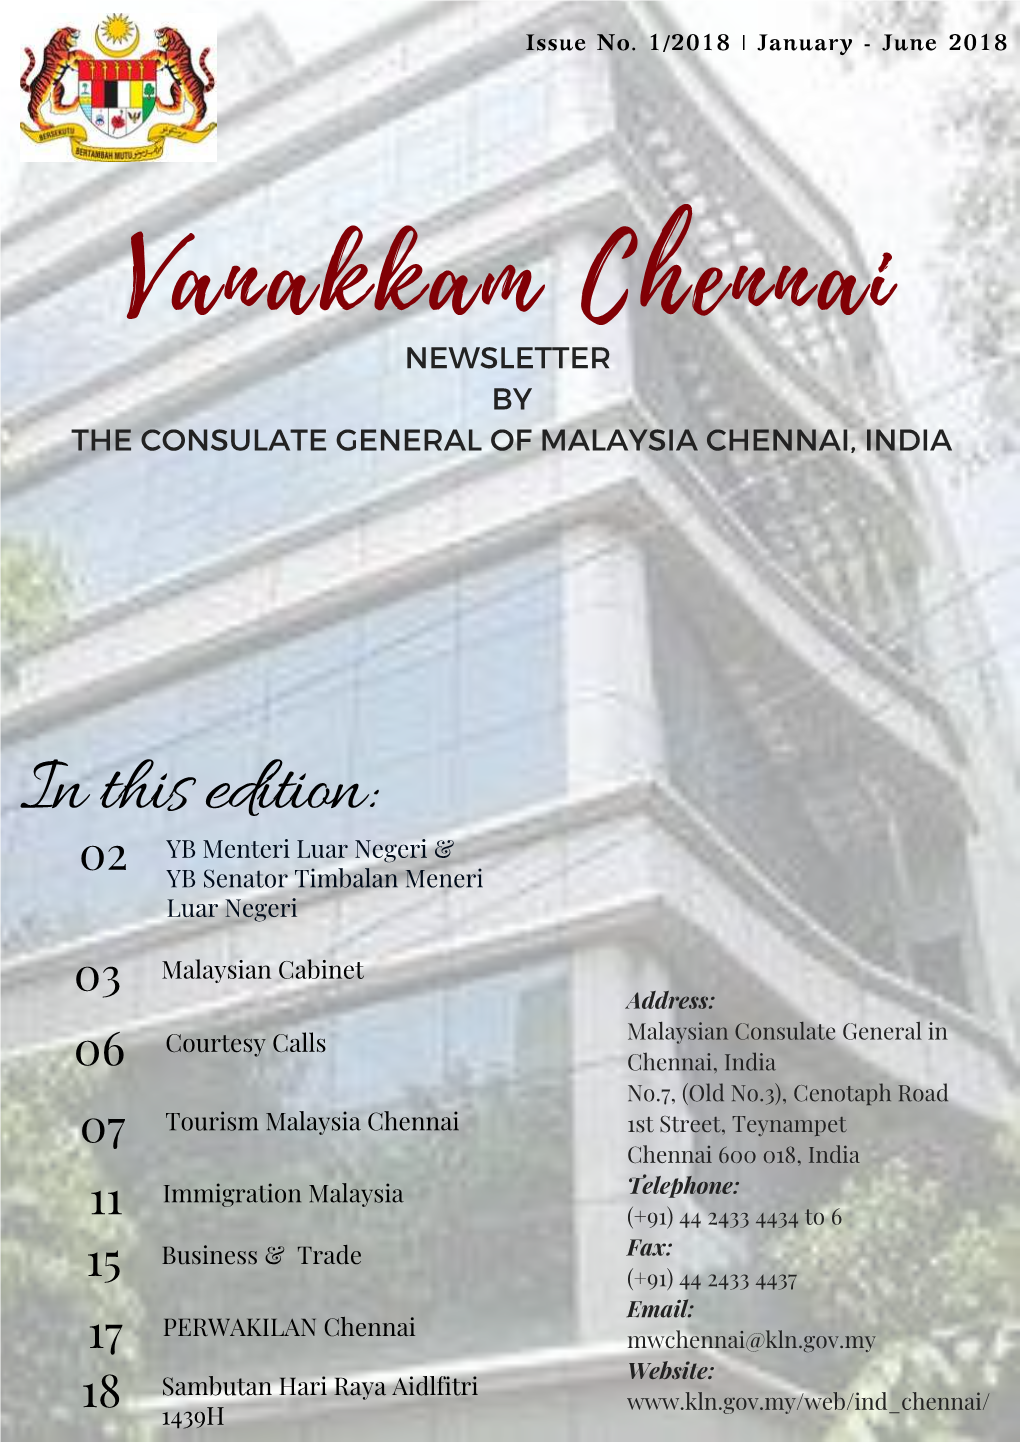 Newsletter by the Consulate General of Malaysia Chennai, India